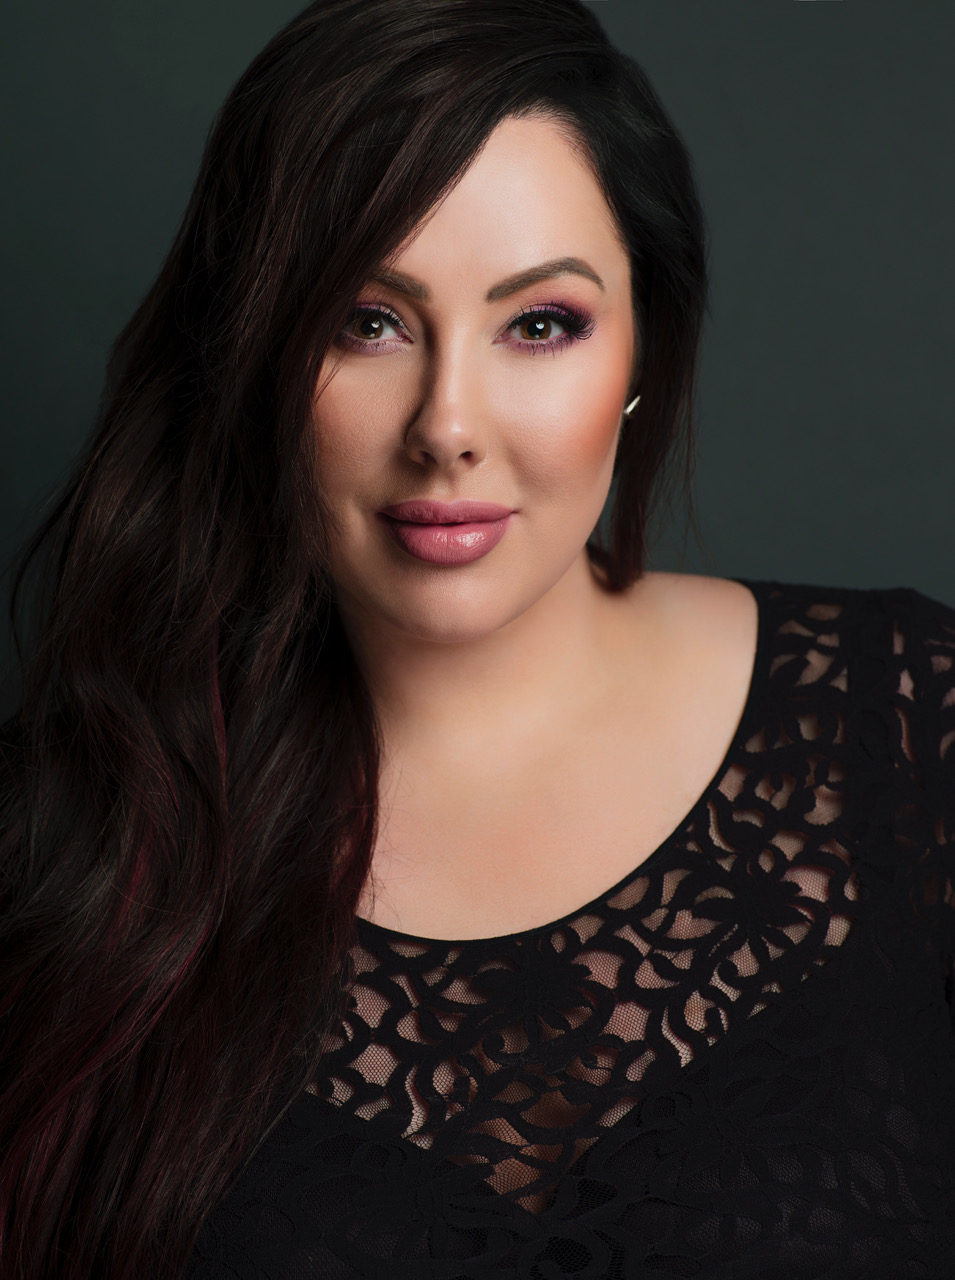 5 Rules For Life: Makeup Geek’s Marlena Stell